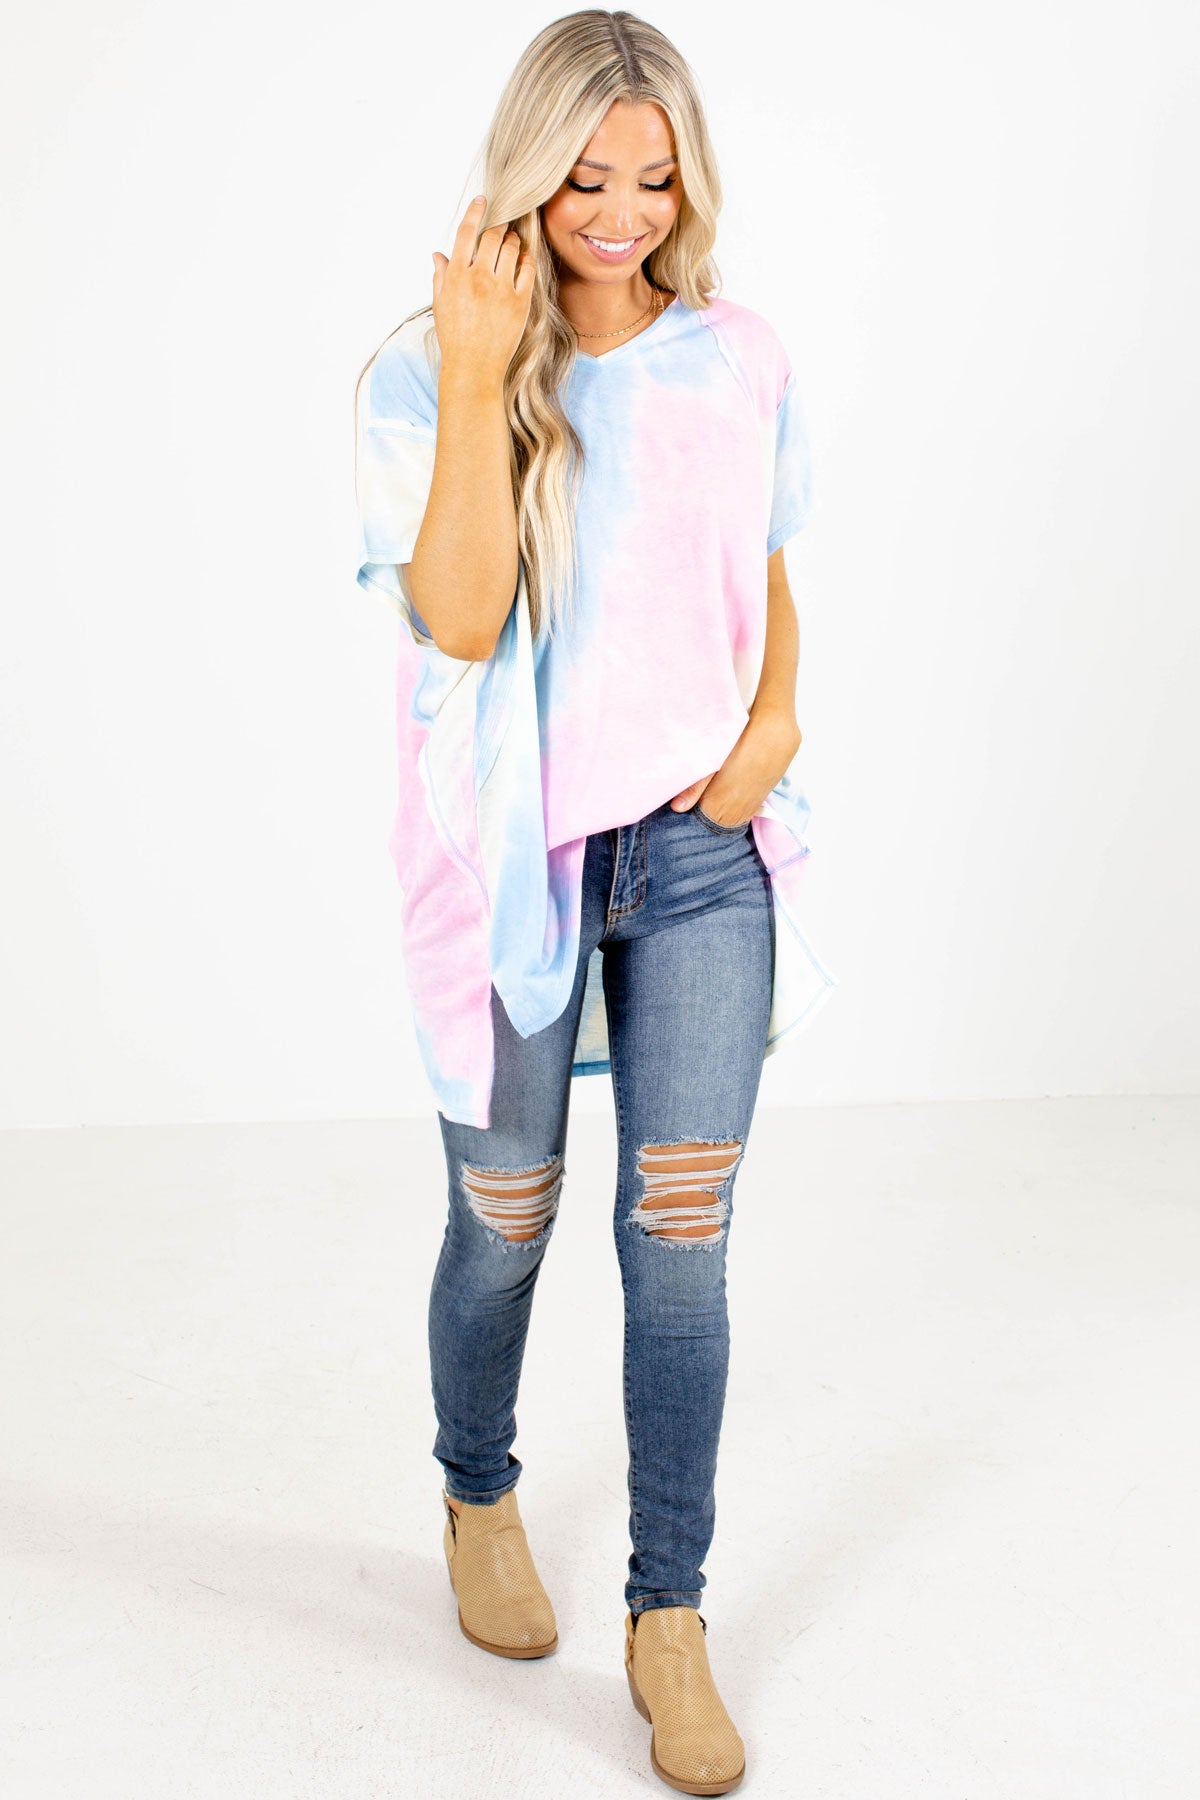 Light Blue and Pink Tie Dye Top For Women